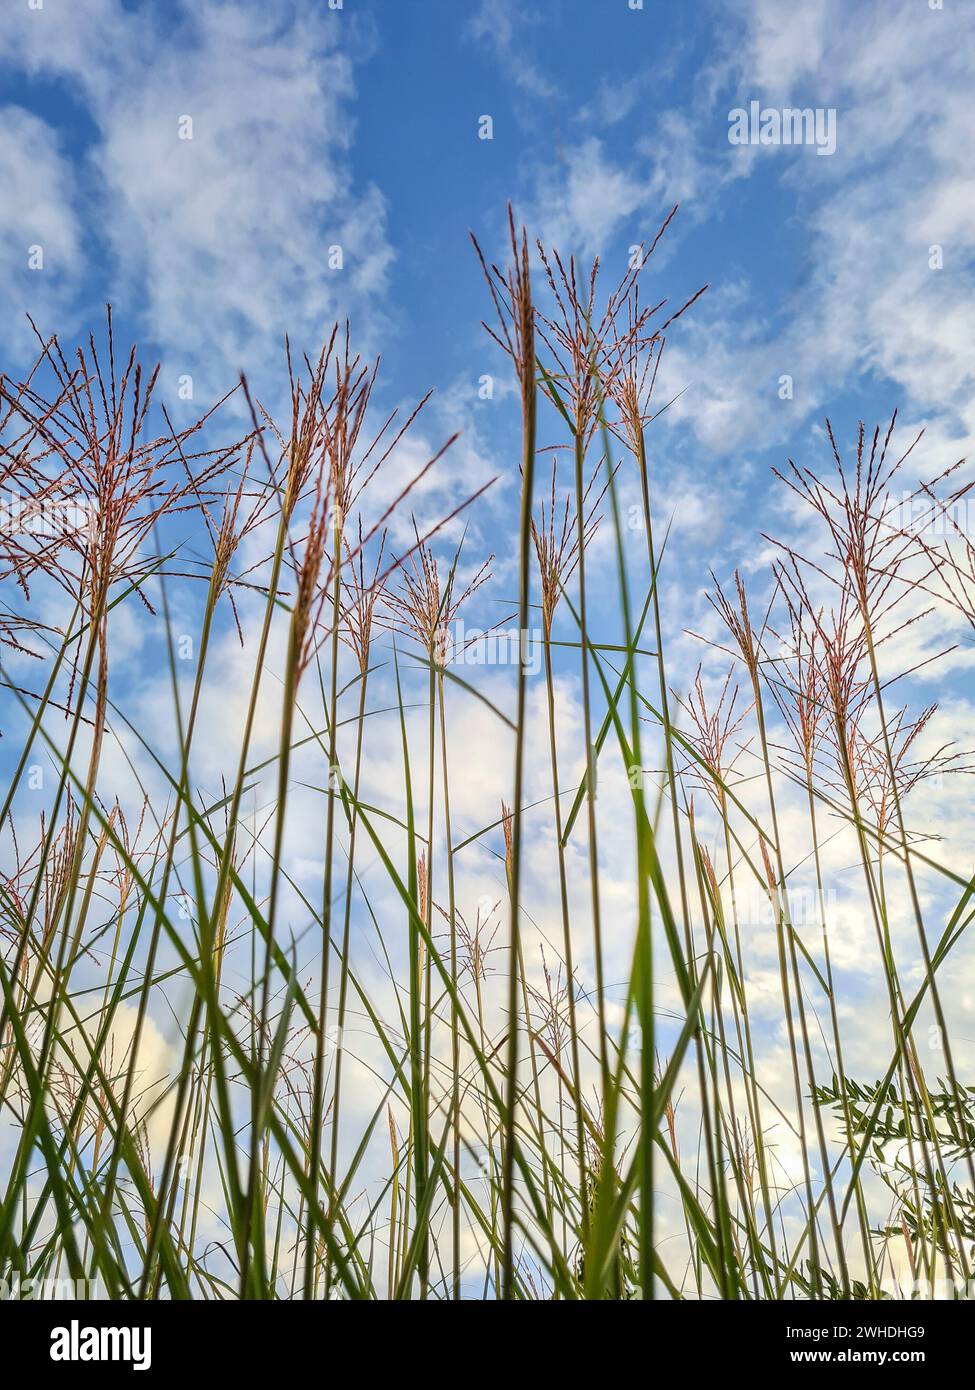 Outdoor shot with blue sky on the horizon with feather grass and grasses in the foreground Stock Photo